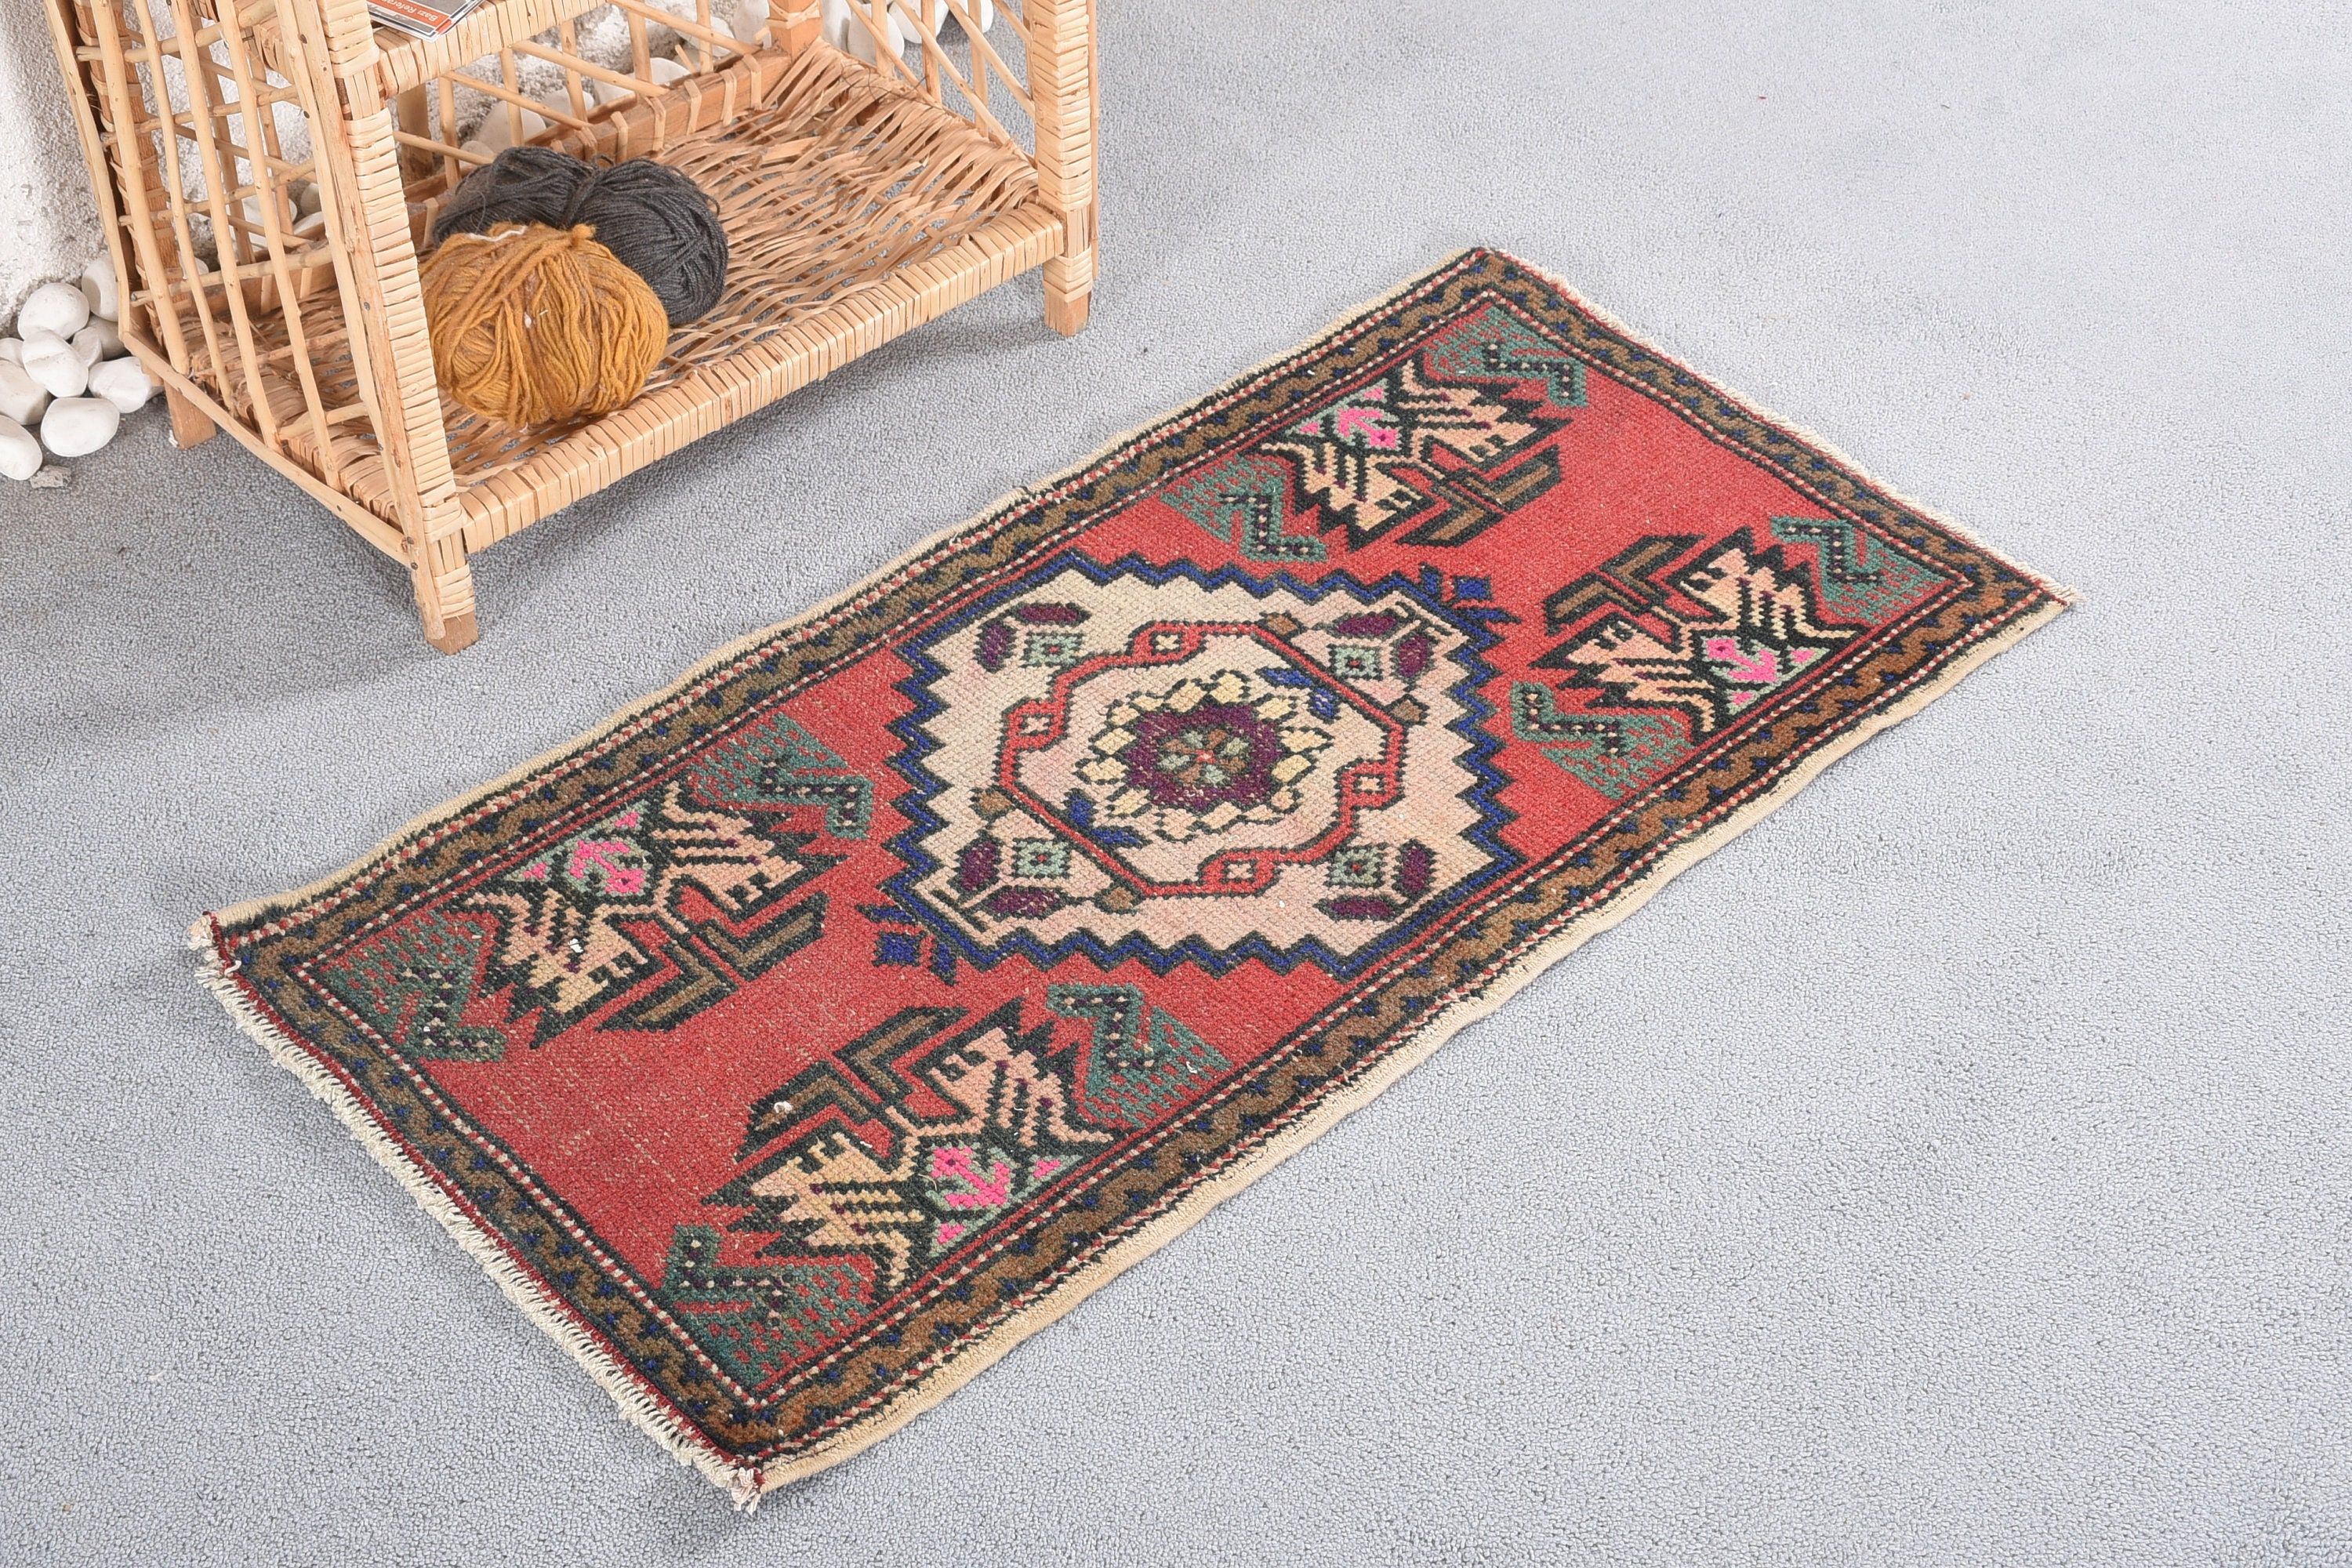 Cool Rugs, Vintage Rug, Moroccan Rug, Red Home Decor Rugs, 1.6x3.1 ft Small Rugs, Bath Rug, Rugs for Door Mat, Turkish Rugs, Door Mat Rugs